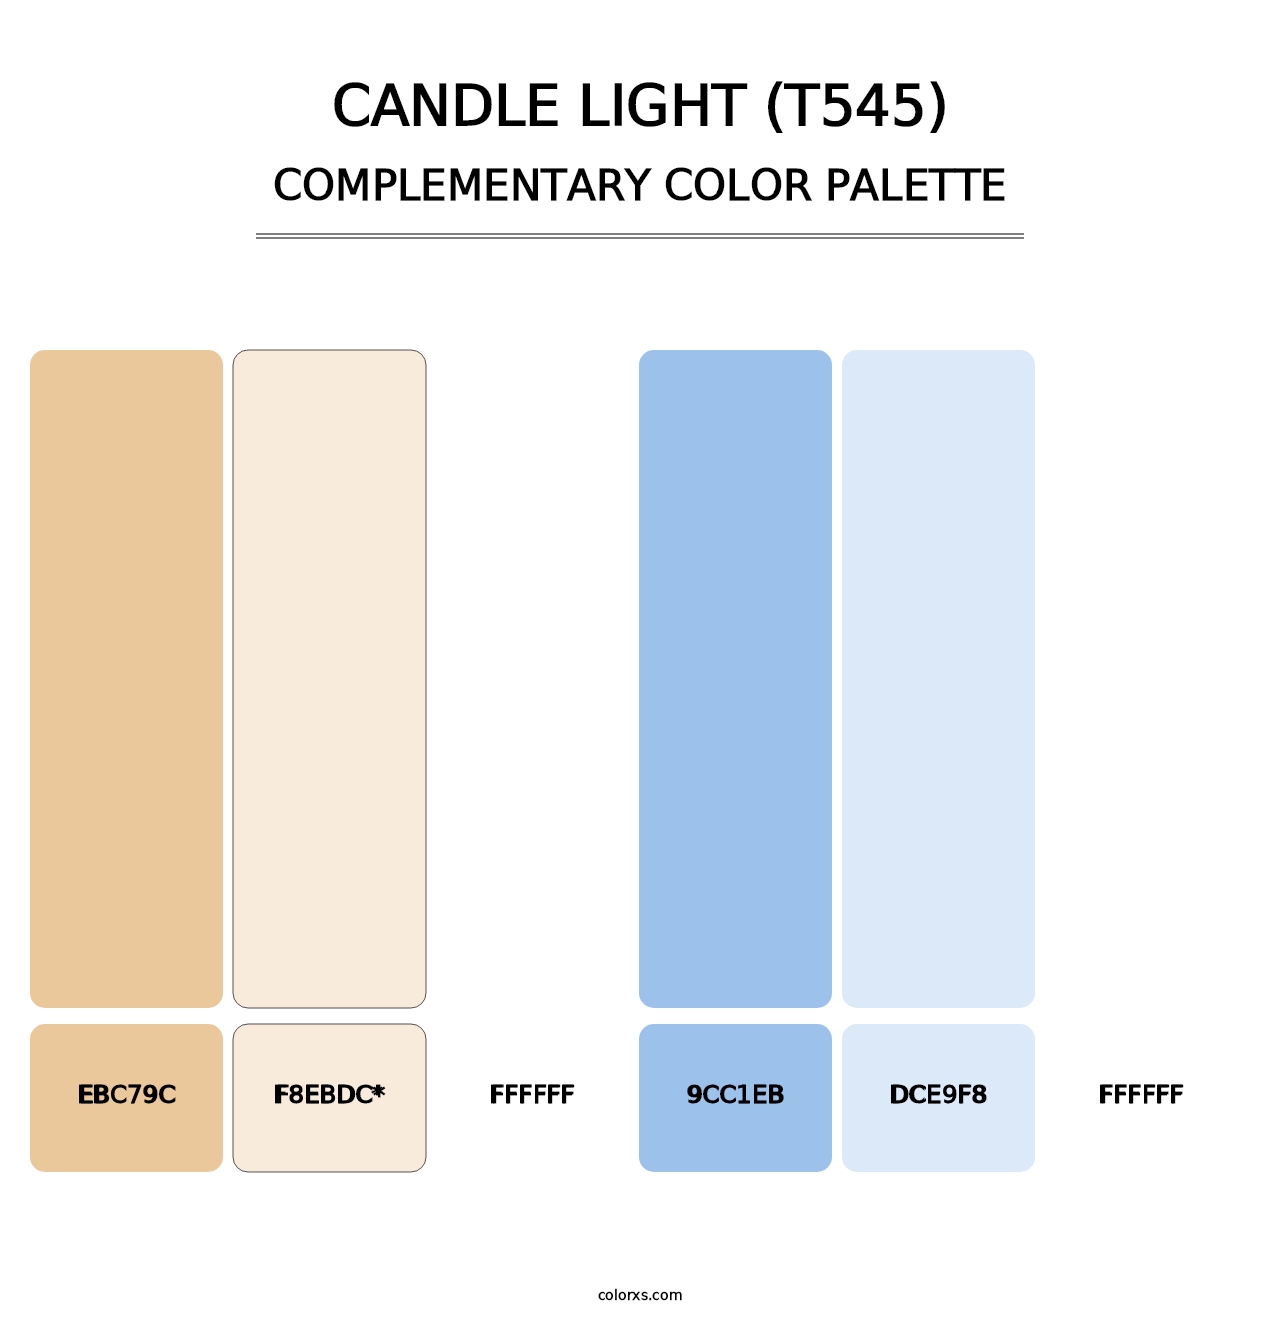 Candle Light (T545) - Complementary Color Palette